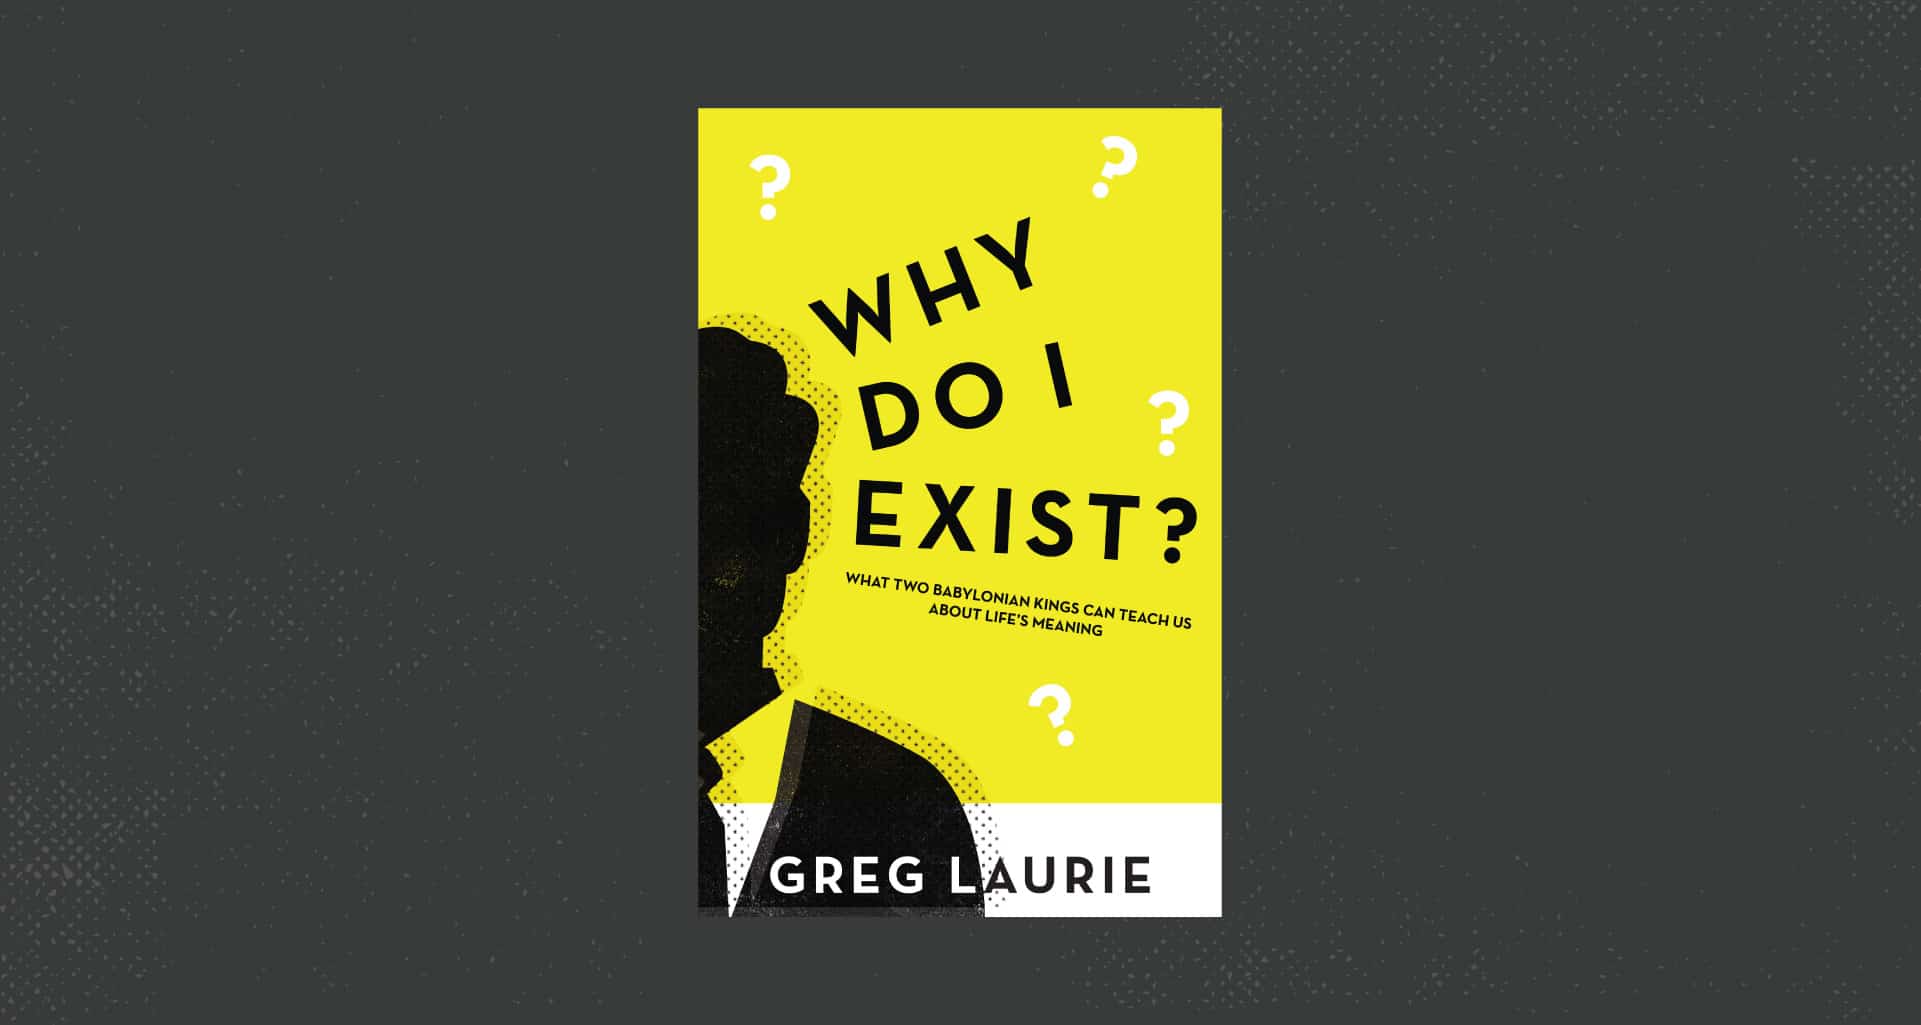 why do i exist book cover with man on cover greg laurie e book